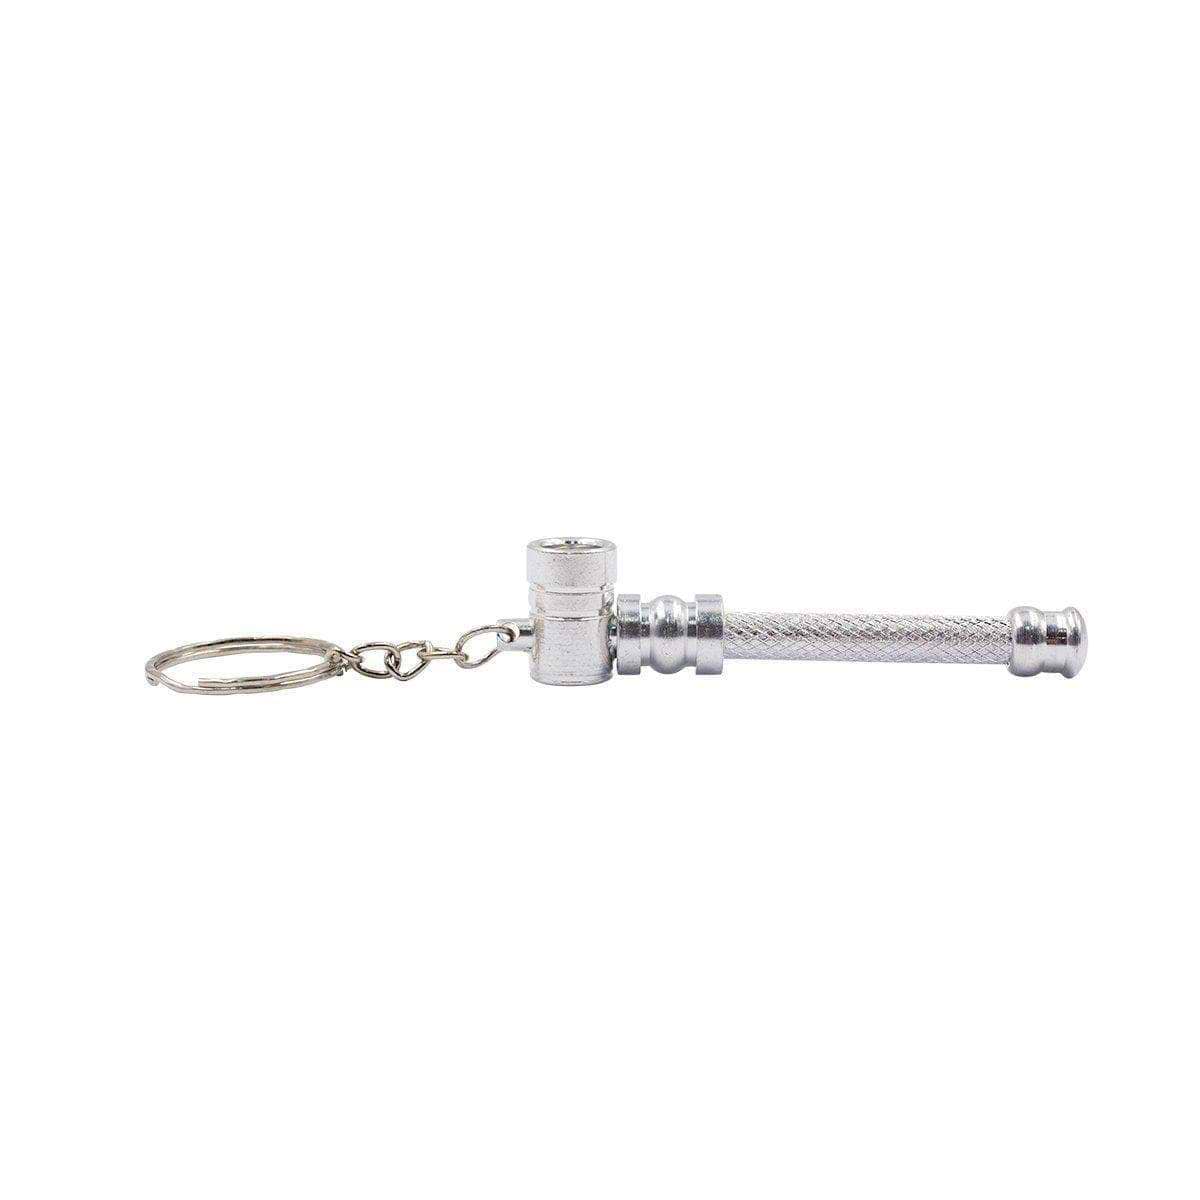 Horizontal Mini keychain pipe in a cylinder hammer-like shape vibrant Green stainless steel both ends with keyring